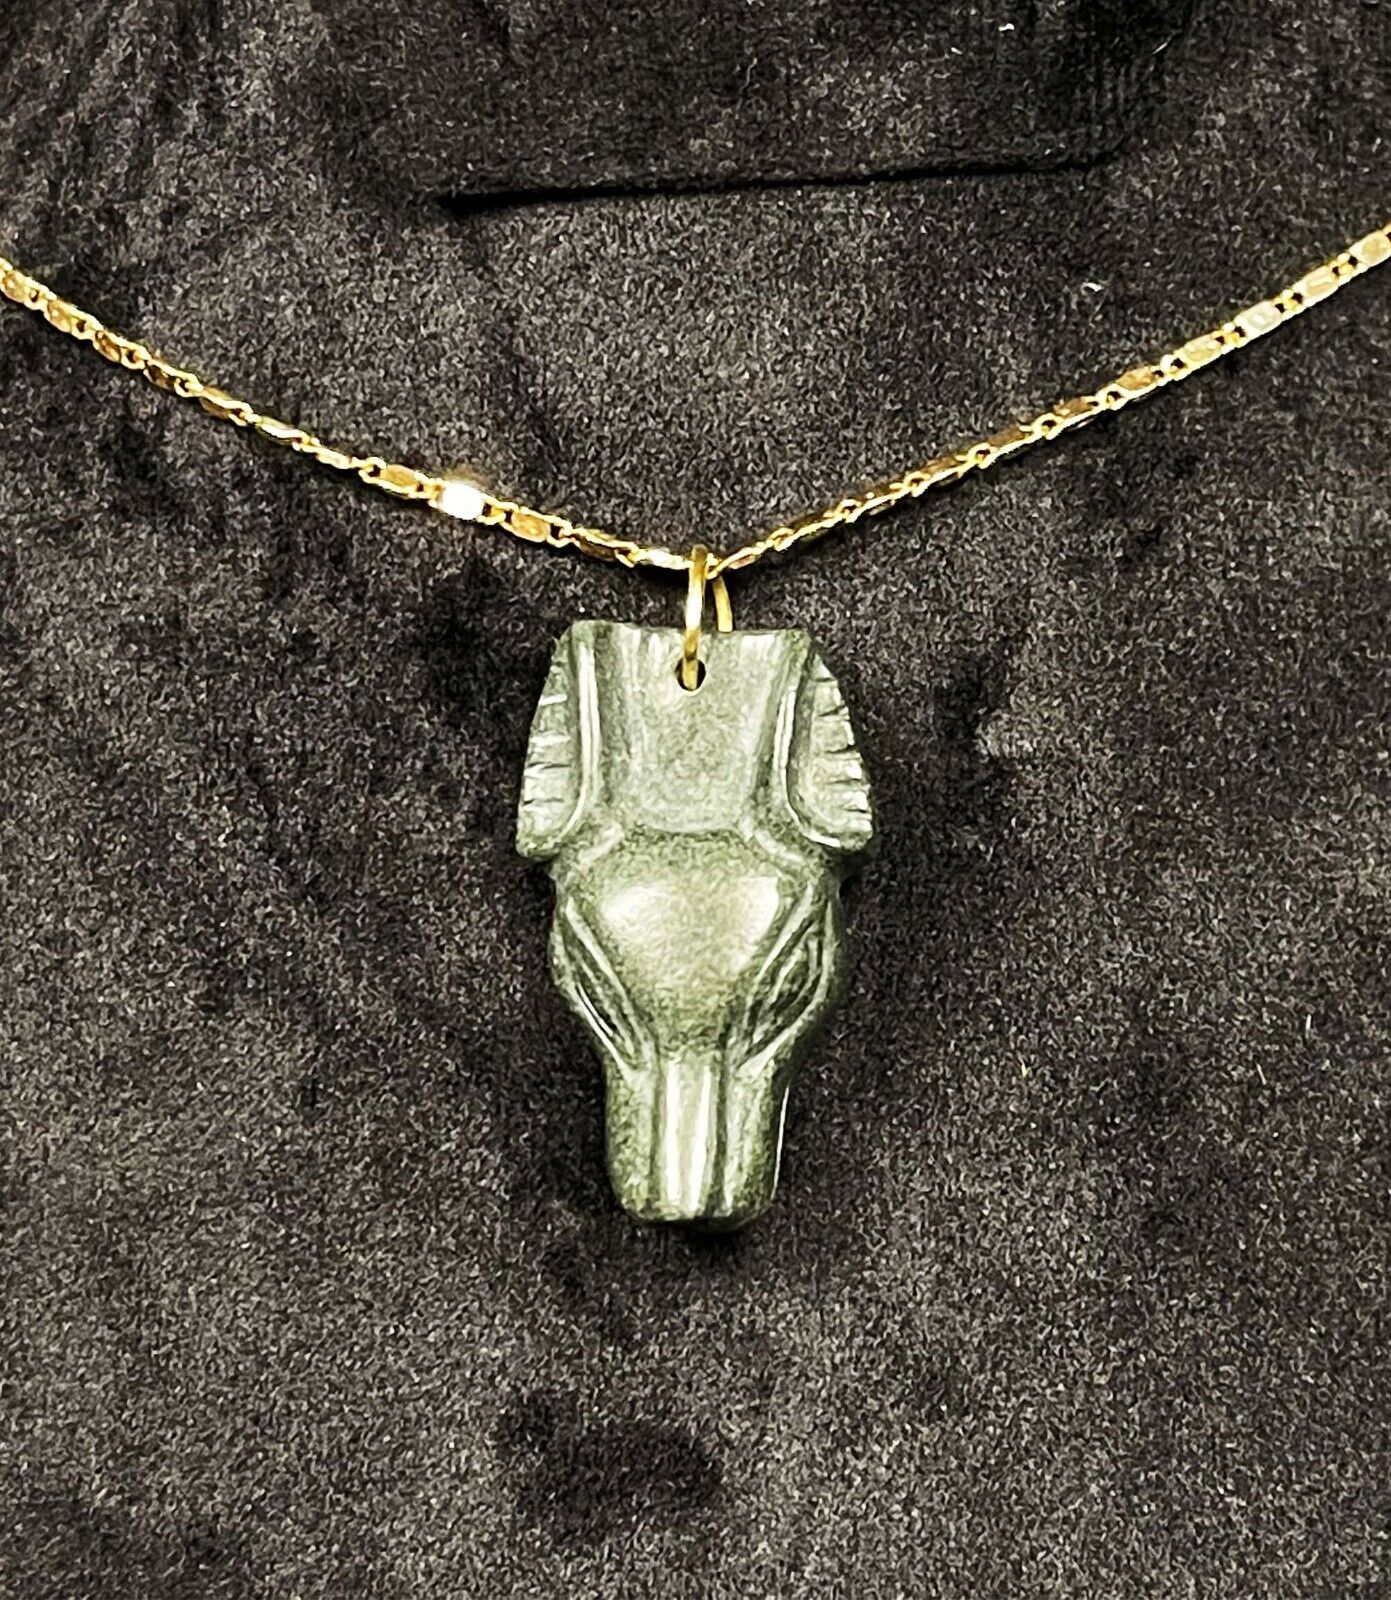 Rare Egyptian Necklace with the Egyptian scarab with the wings and The of Horus